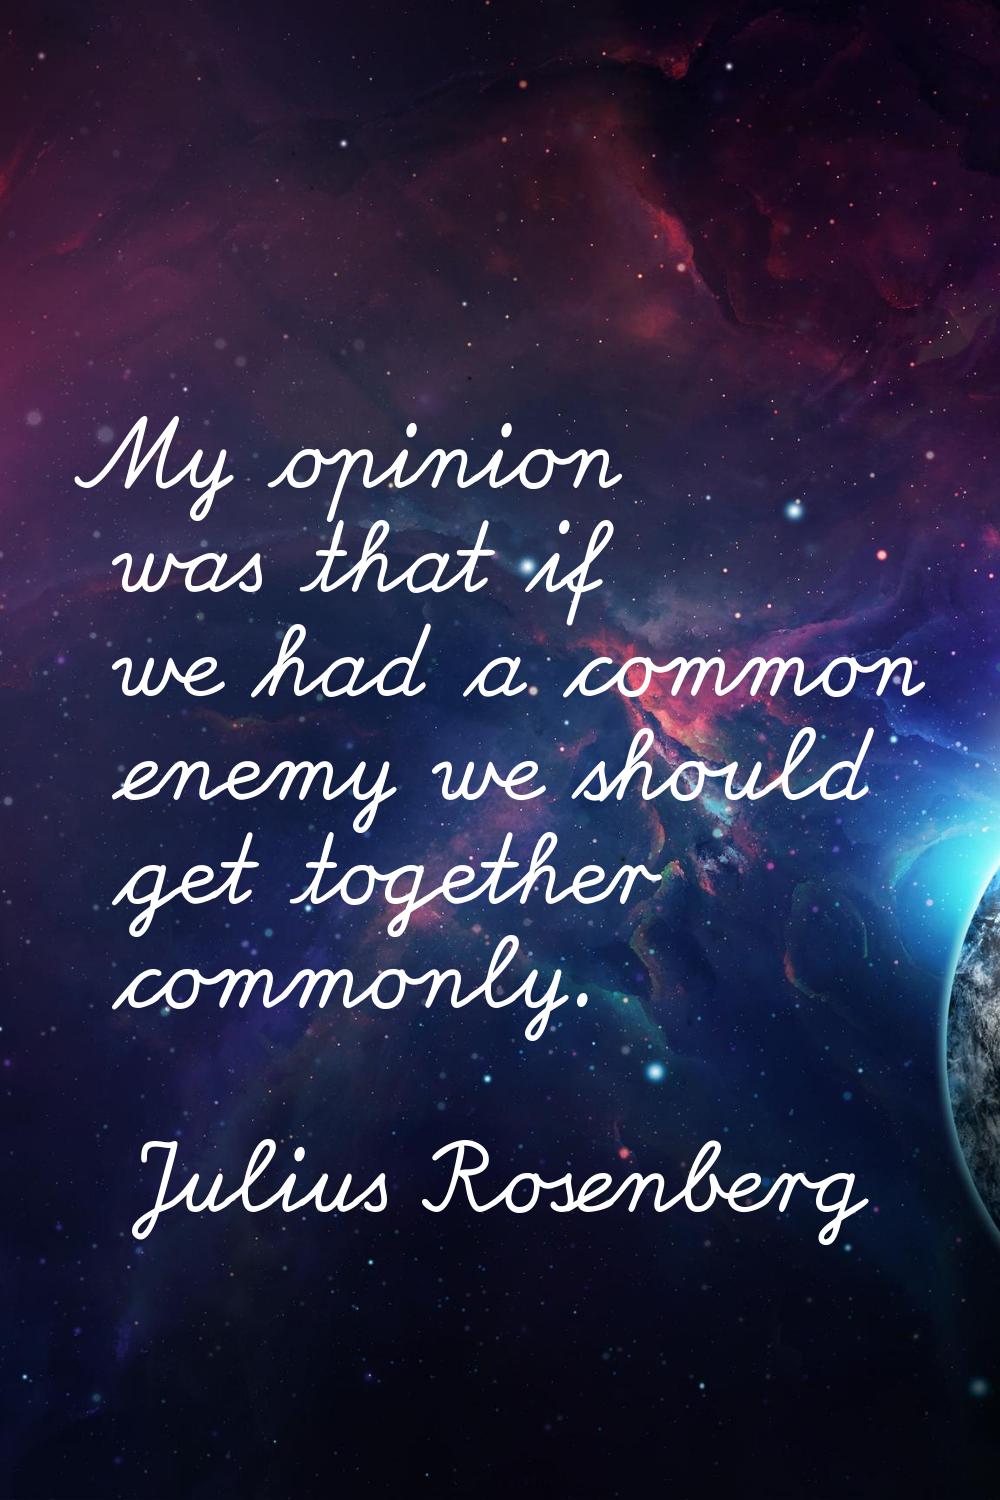 My opinion was that if we had a common enemy we should get together commonly.